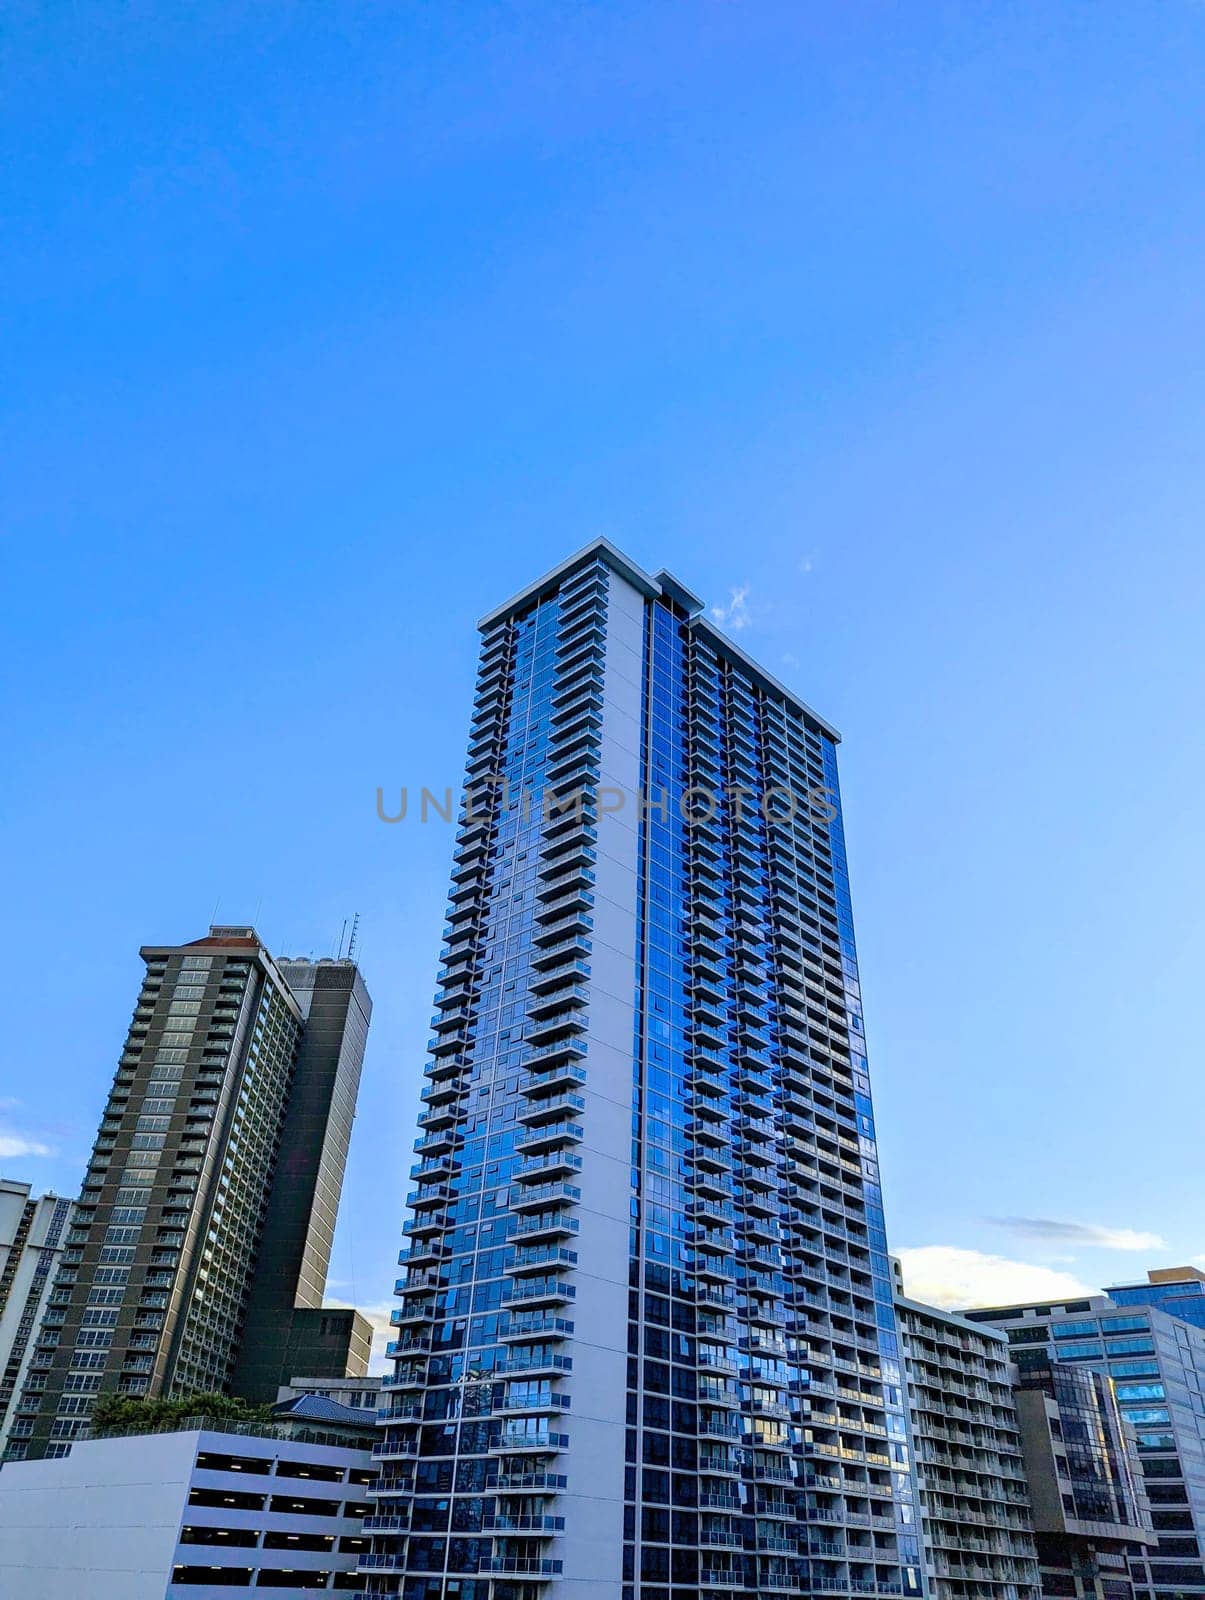 Honolulu - July 17, 2023: A photo of a modern high-rise condo building in the Ala Moana area of Oahu, Hawaii. The building is tall and rectangular with a blue glass facade. The photo shows the contrast between the urban and the natural landscape, as well as the blue sky and the clouds. The photo is taken from a low angle, looking up at the building.